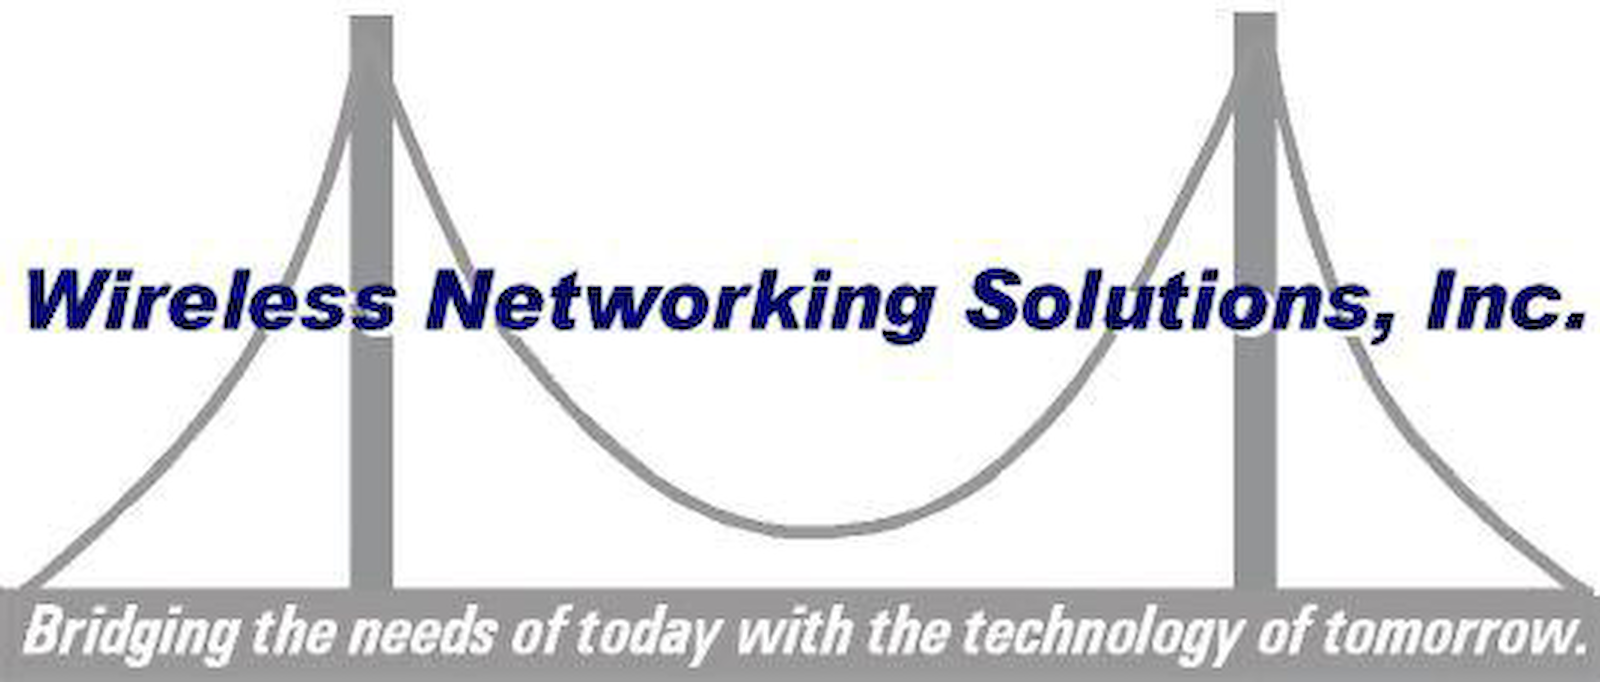 Wireless Networking Solutions, Inc.